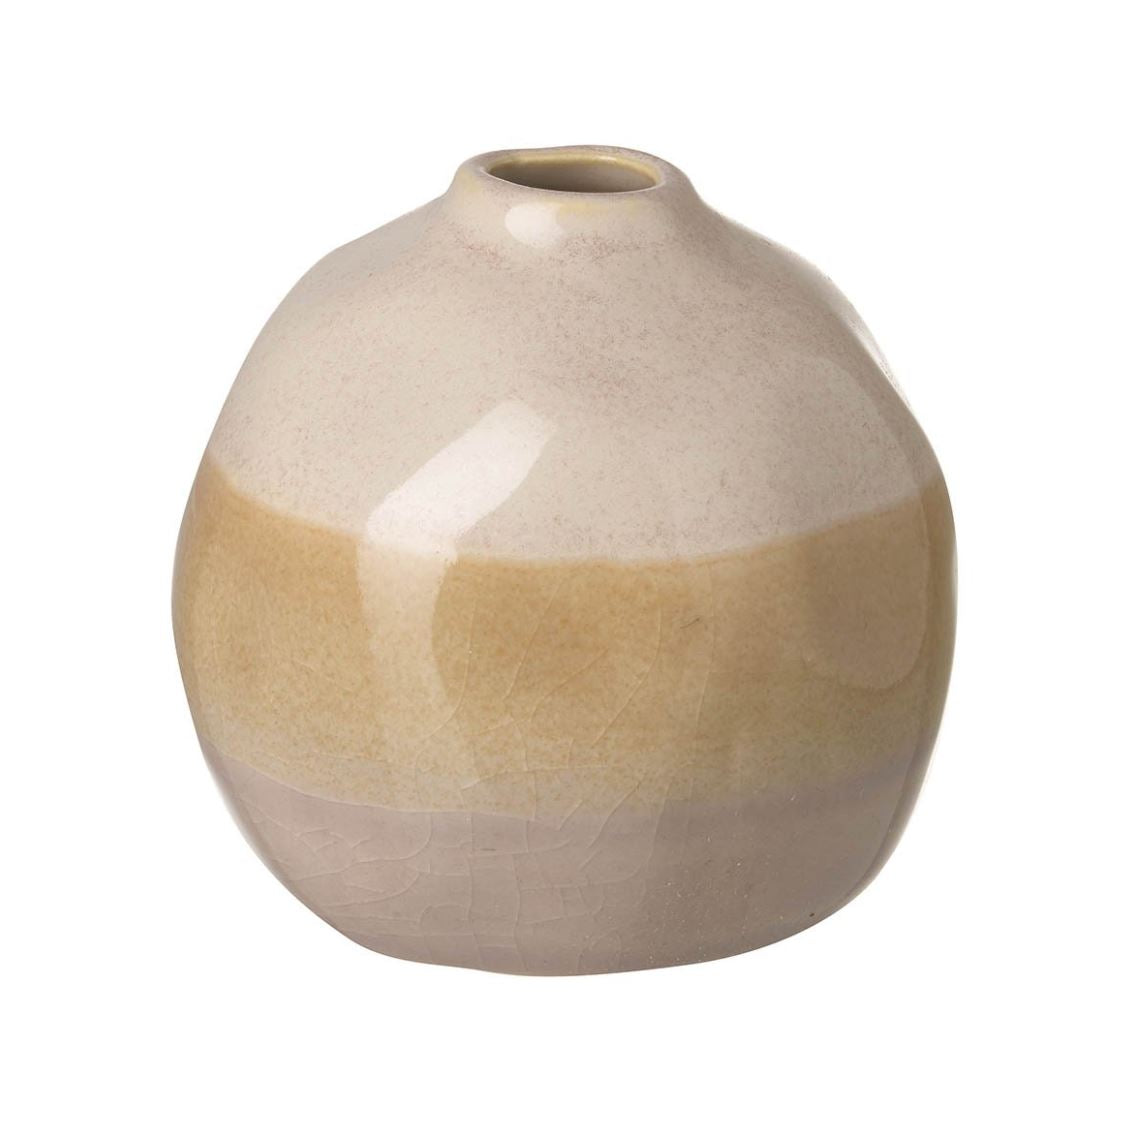 Organic-shaped Ombre Pink Earthenware Bud Vase